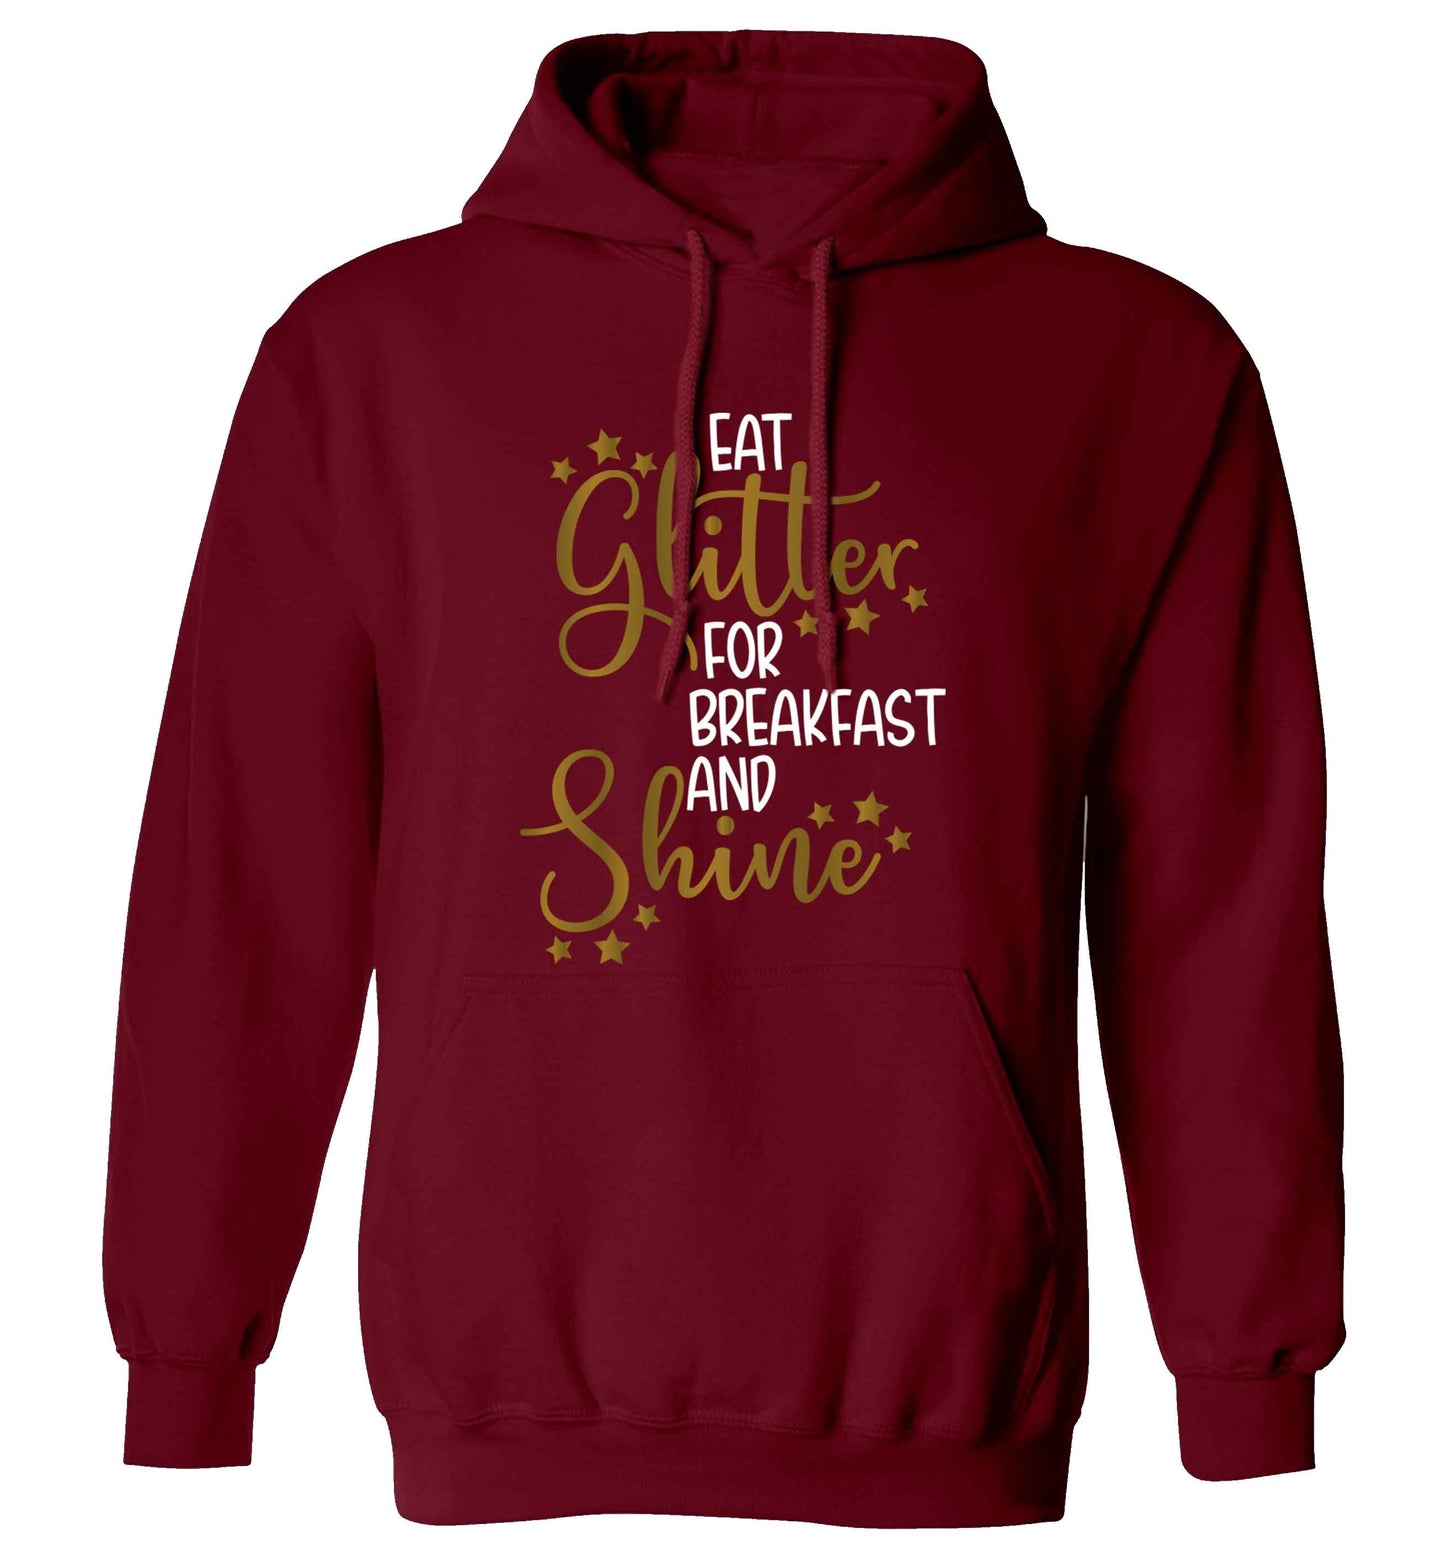 Eat glitter for breakfast and shine all day adults unisex maroon hoodie 2XL